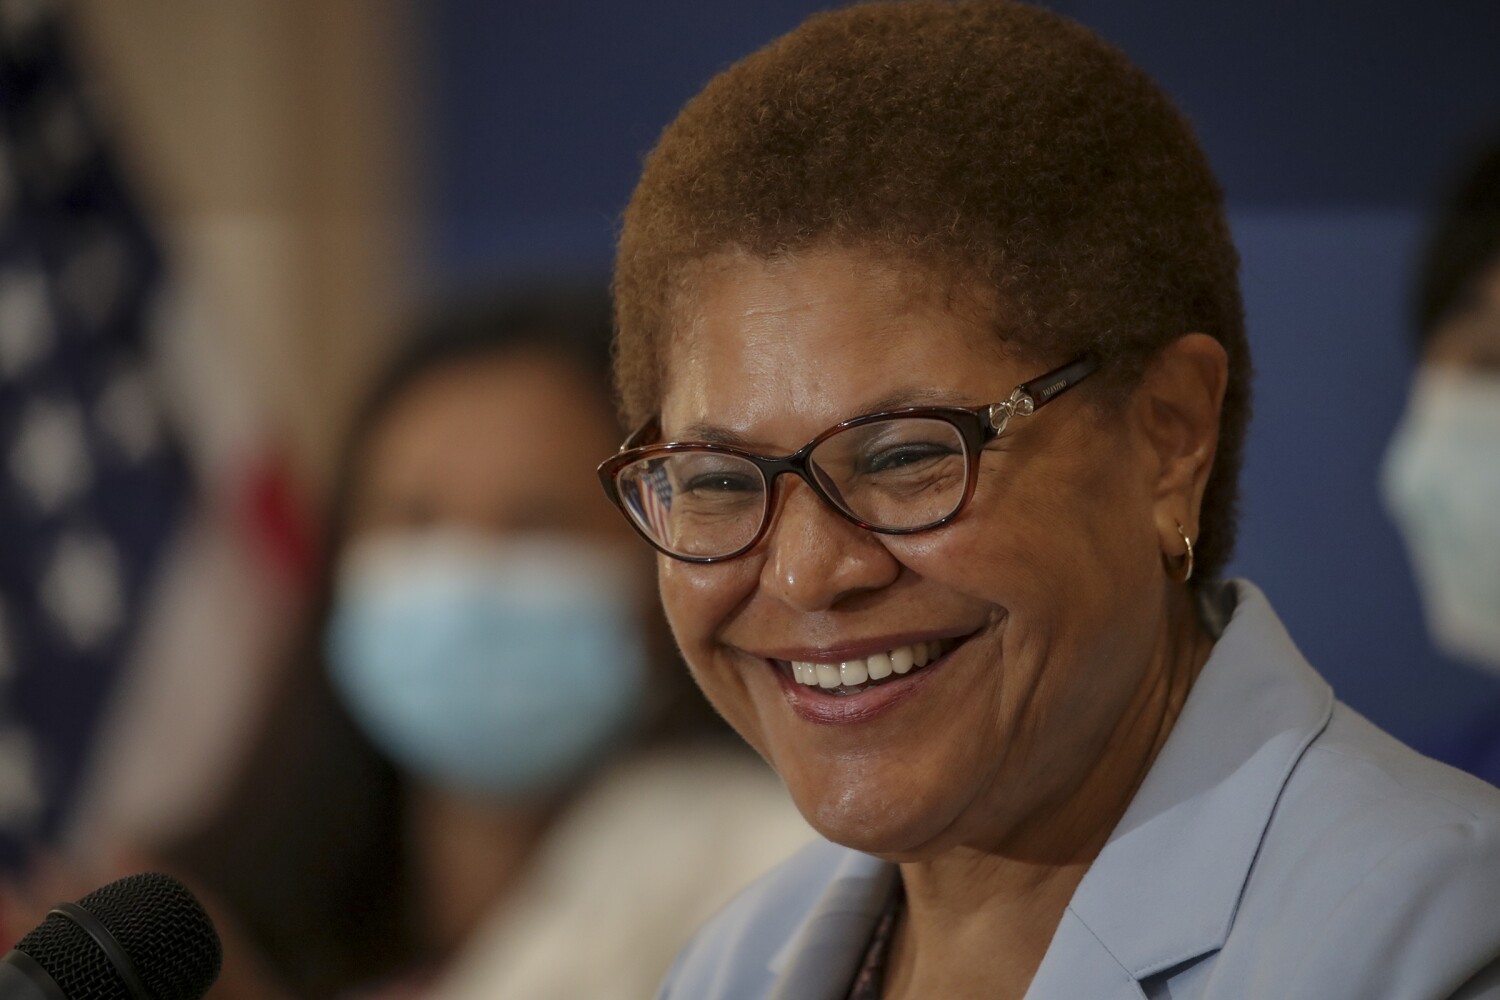 Rep. Karen Bass is planning a run for L.A. mayor in 2022, sources say